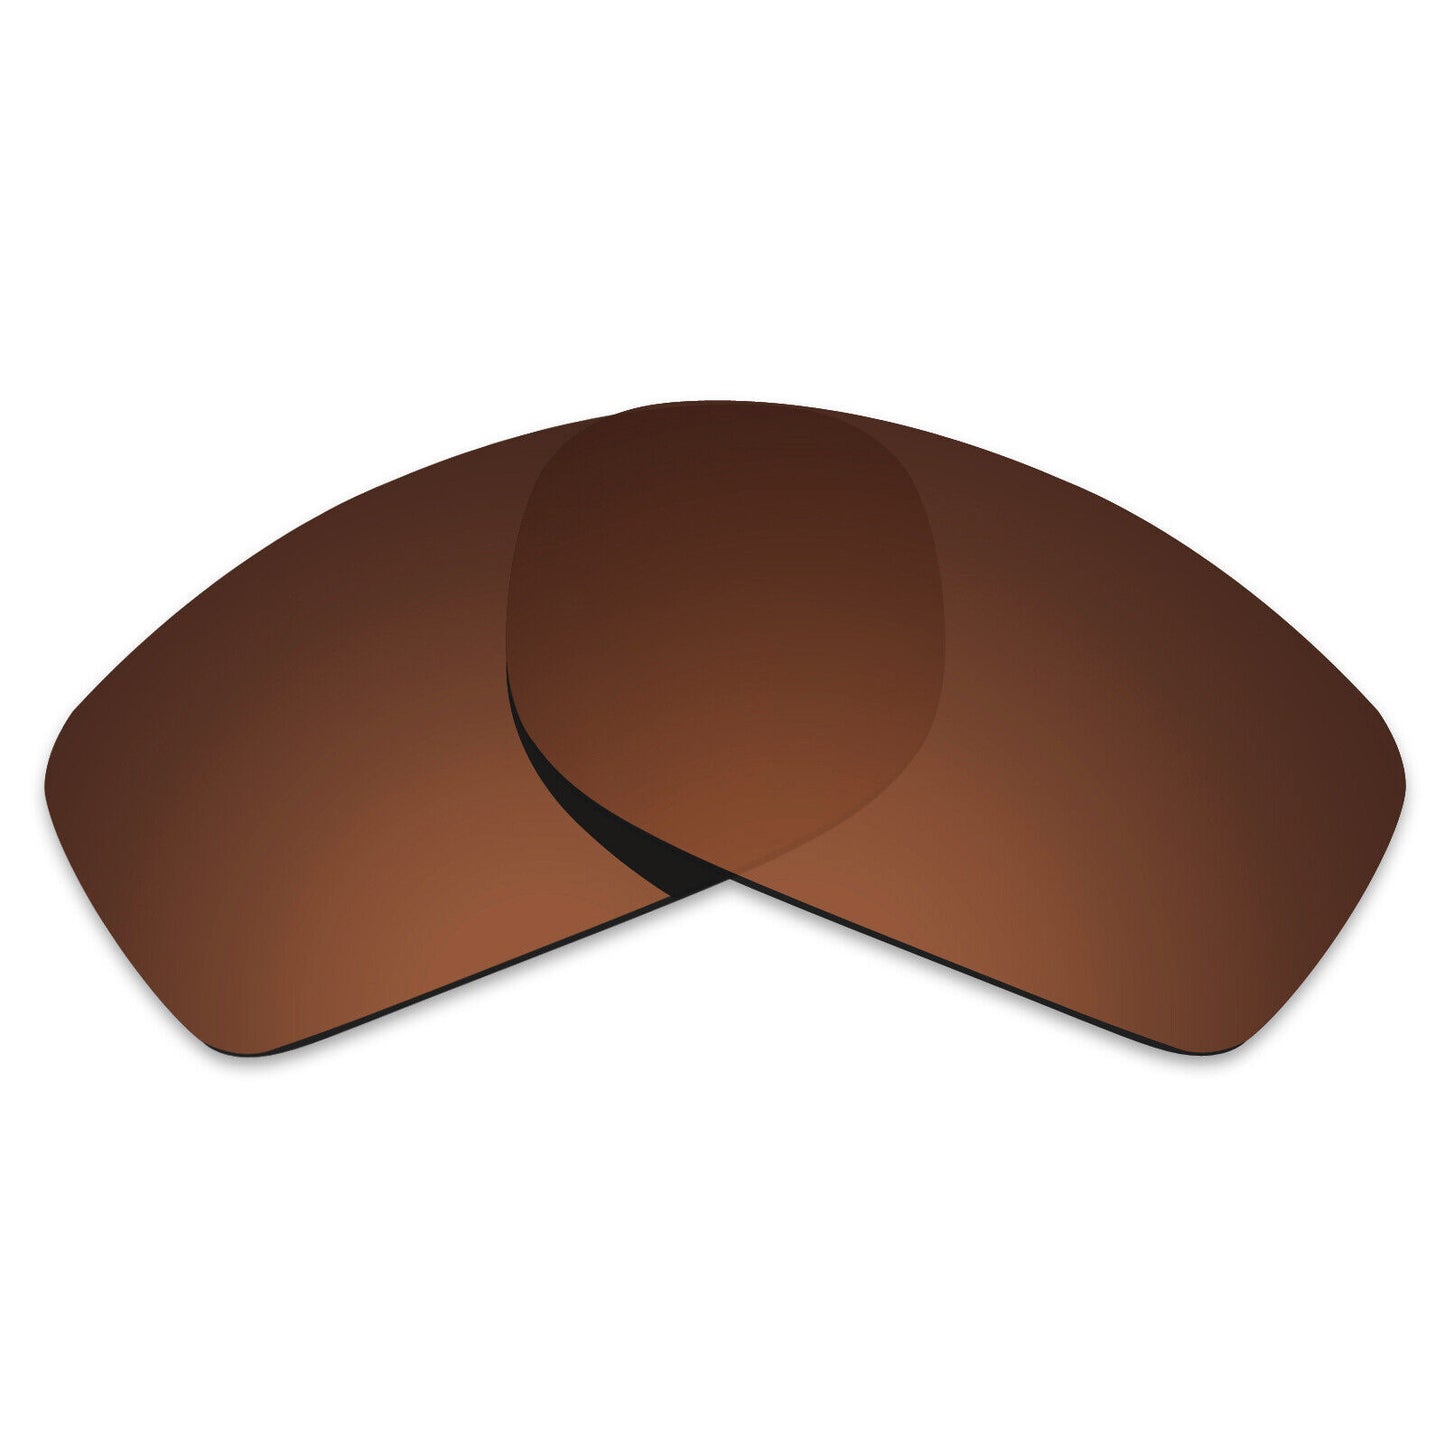 Hawkry Polycarbonate Replacement Lenses for-Oakley Fives Squared -Bronze Brown